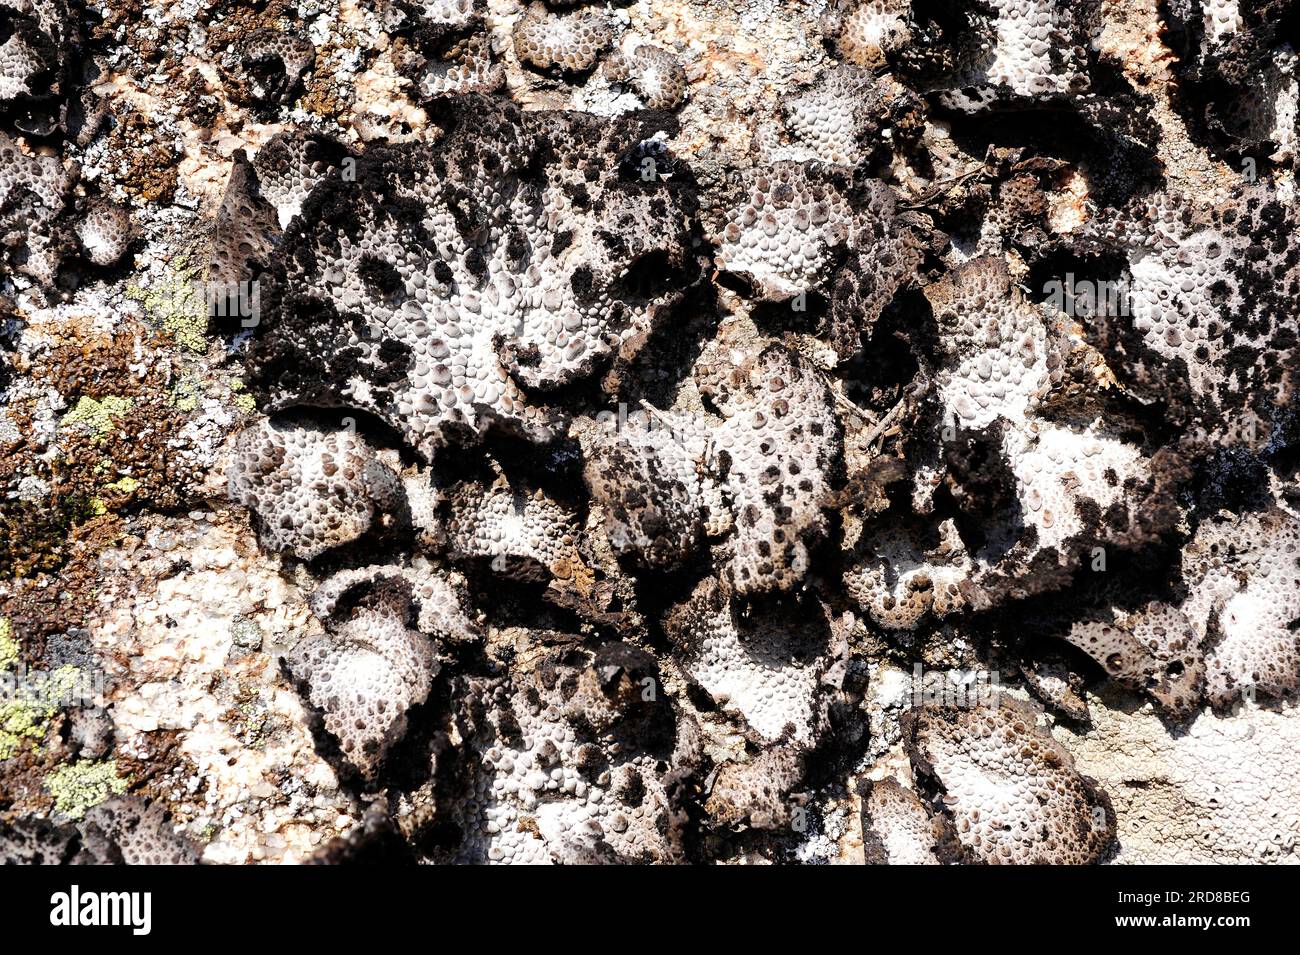 Rock tripe (Umbilicaria pustulata or Lasallia pustulata) is an umbilicate lichen with the upper thallus surface with convex pustules; its color varies Stock Photo